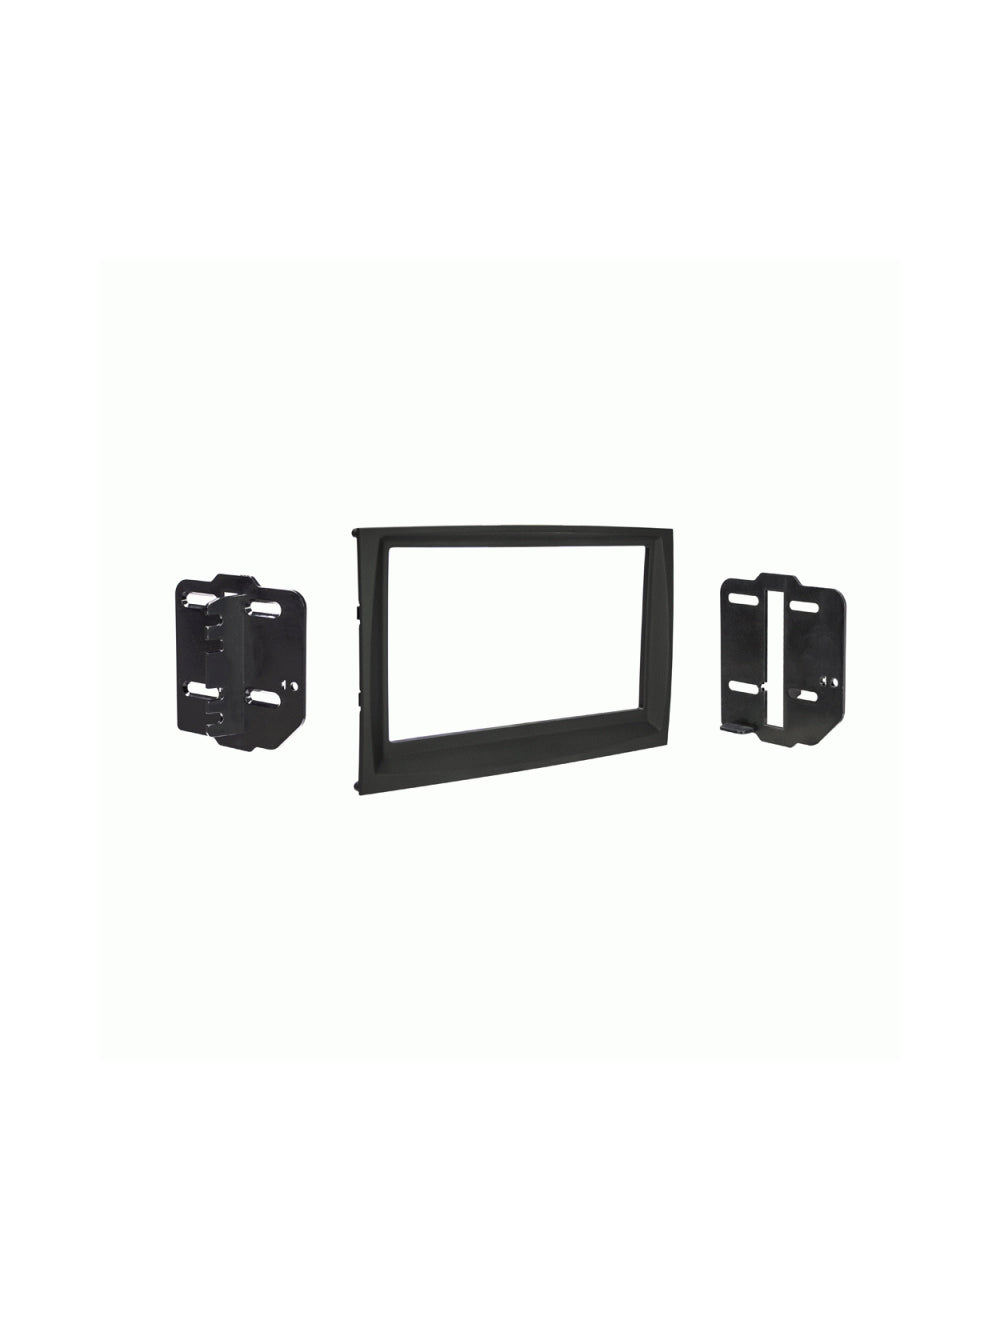 Metra 95-7378B Double-DIN Installation Kit for Kia Sportage 2017-Up with 5.0 inch Screen